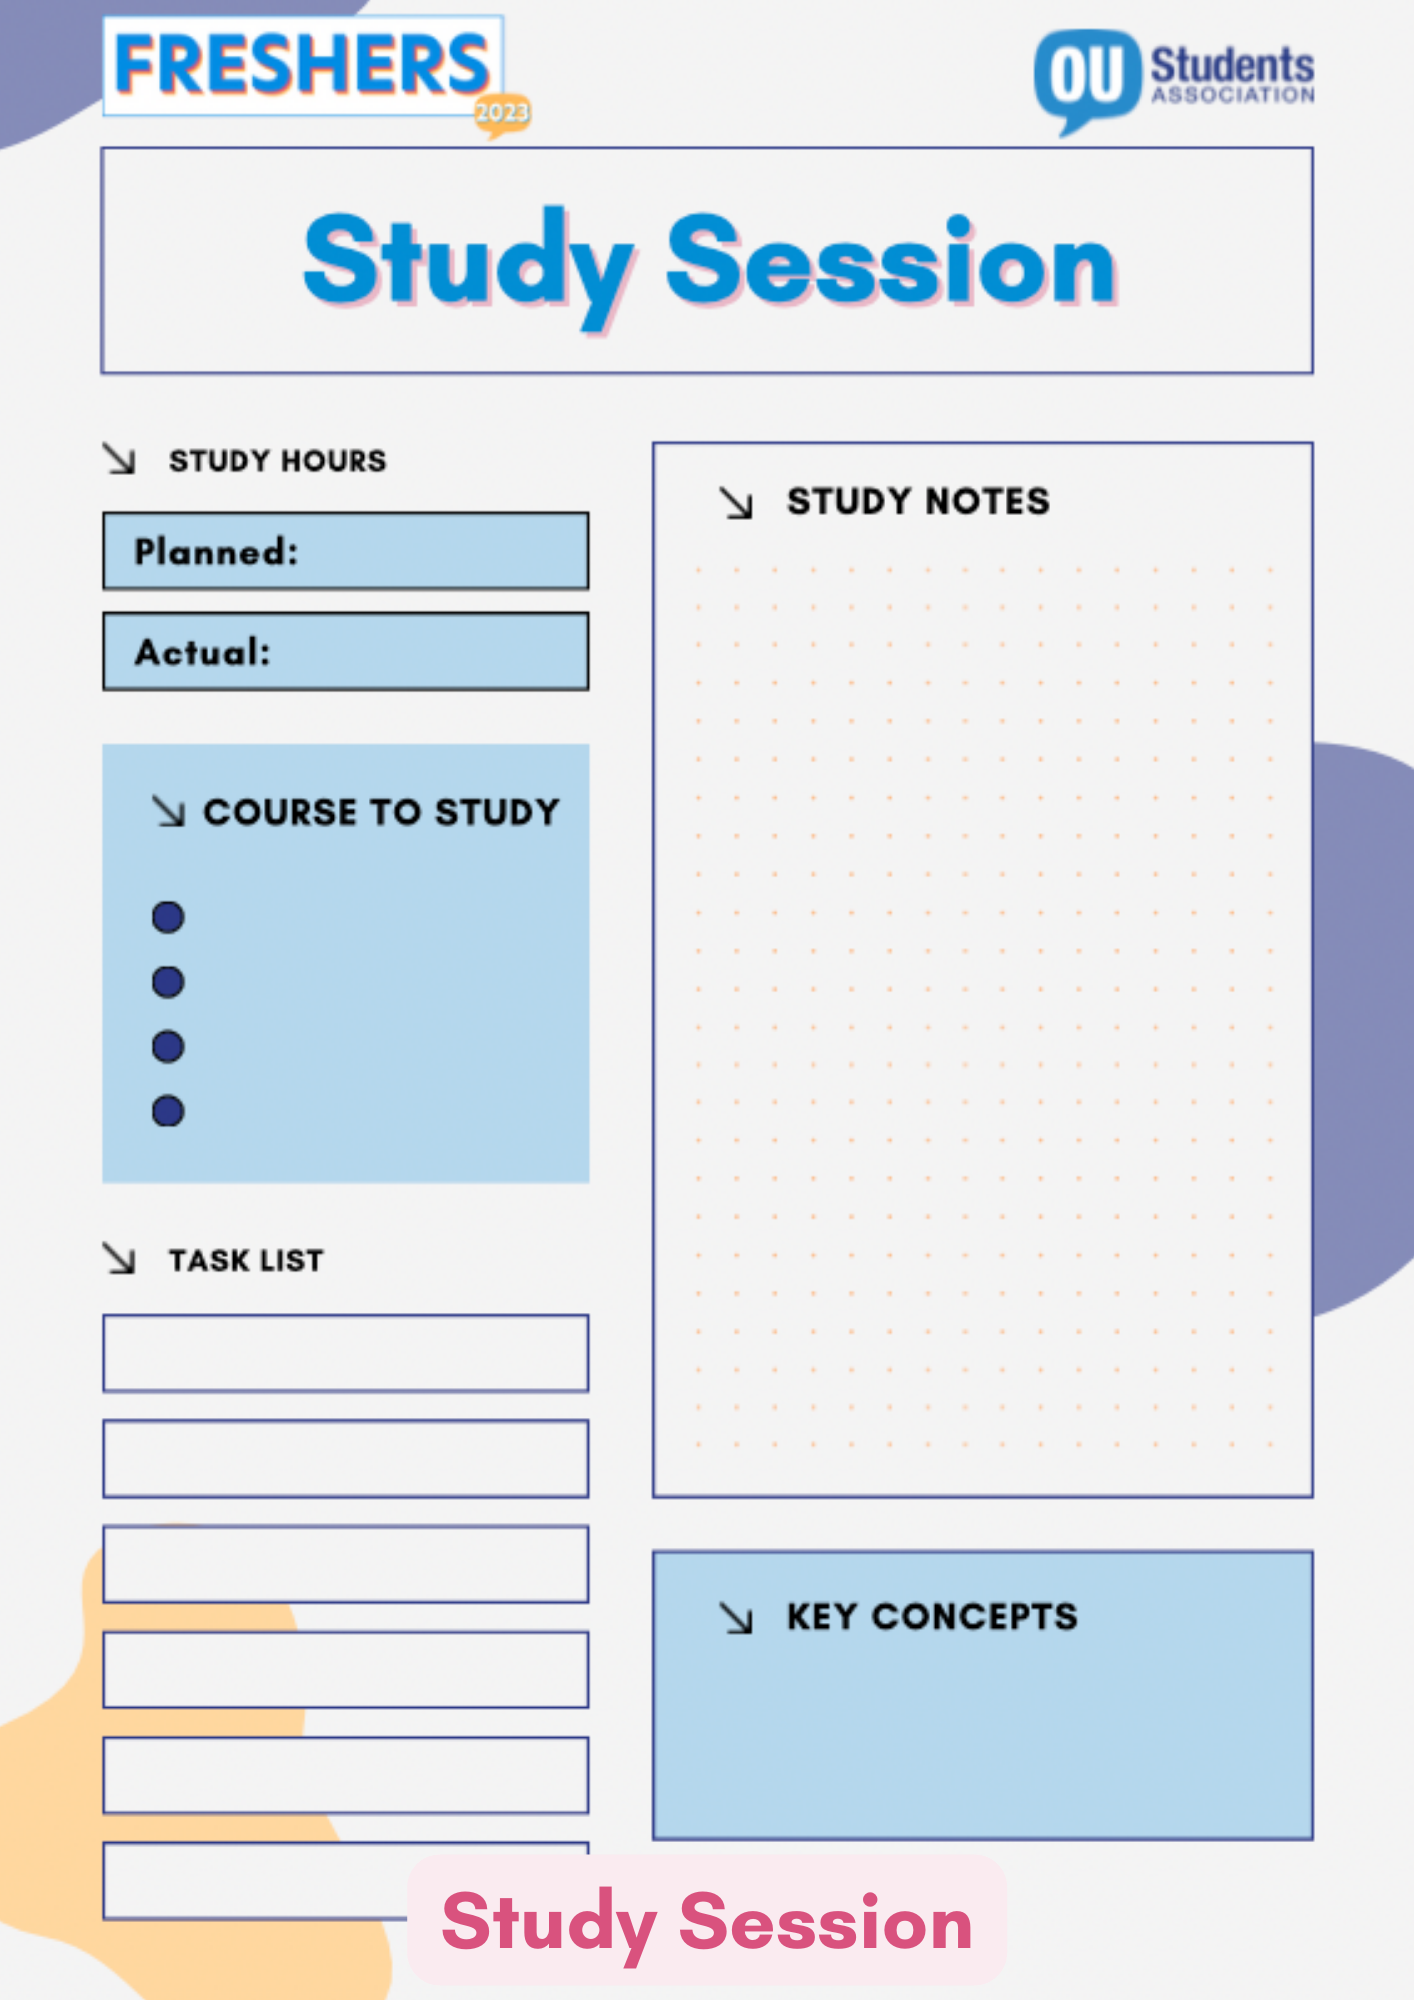 Image reads: Study session. This planner has a space to write your planned and actual study hours, study notes, courses to study, task list and key concepts.